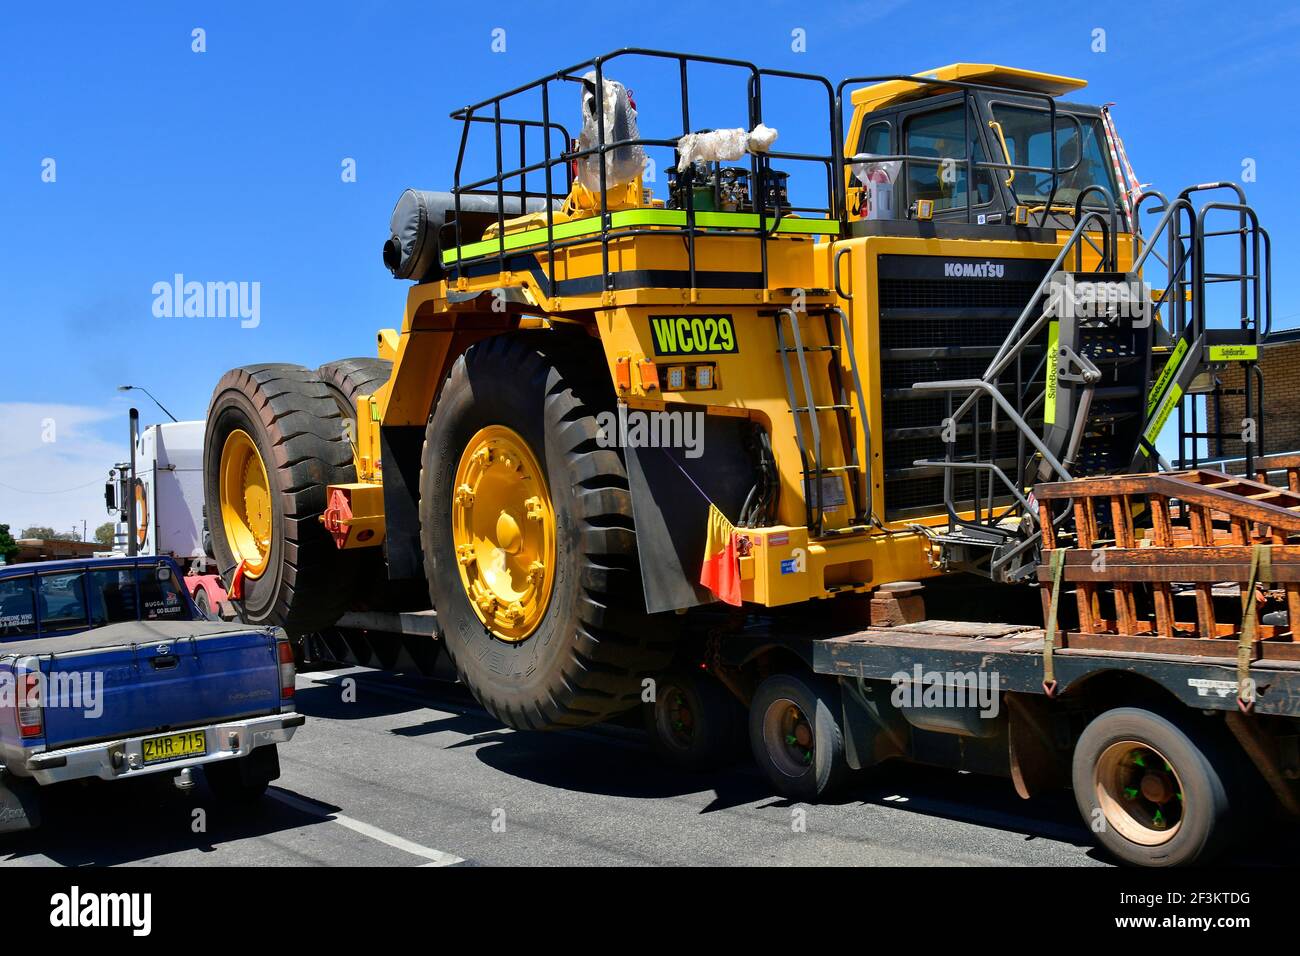 Broken Hill, Victoria, Australia - November 10, 2017: Abnormal wide load on truck usually named road train carry a mining vehicle in the frontier city Stock Photo